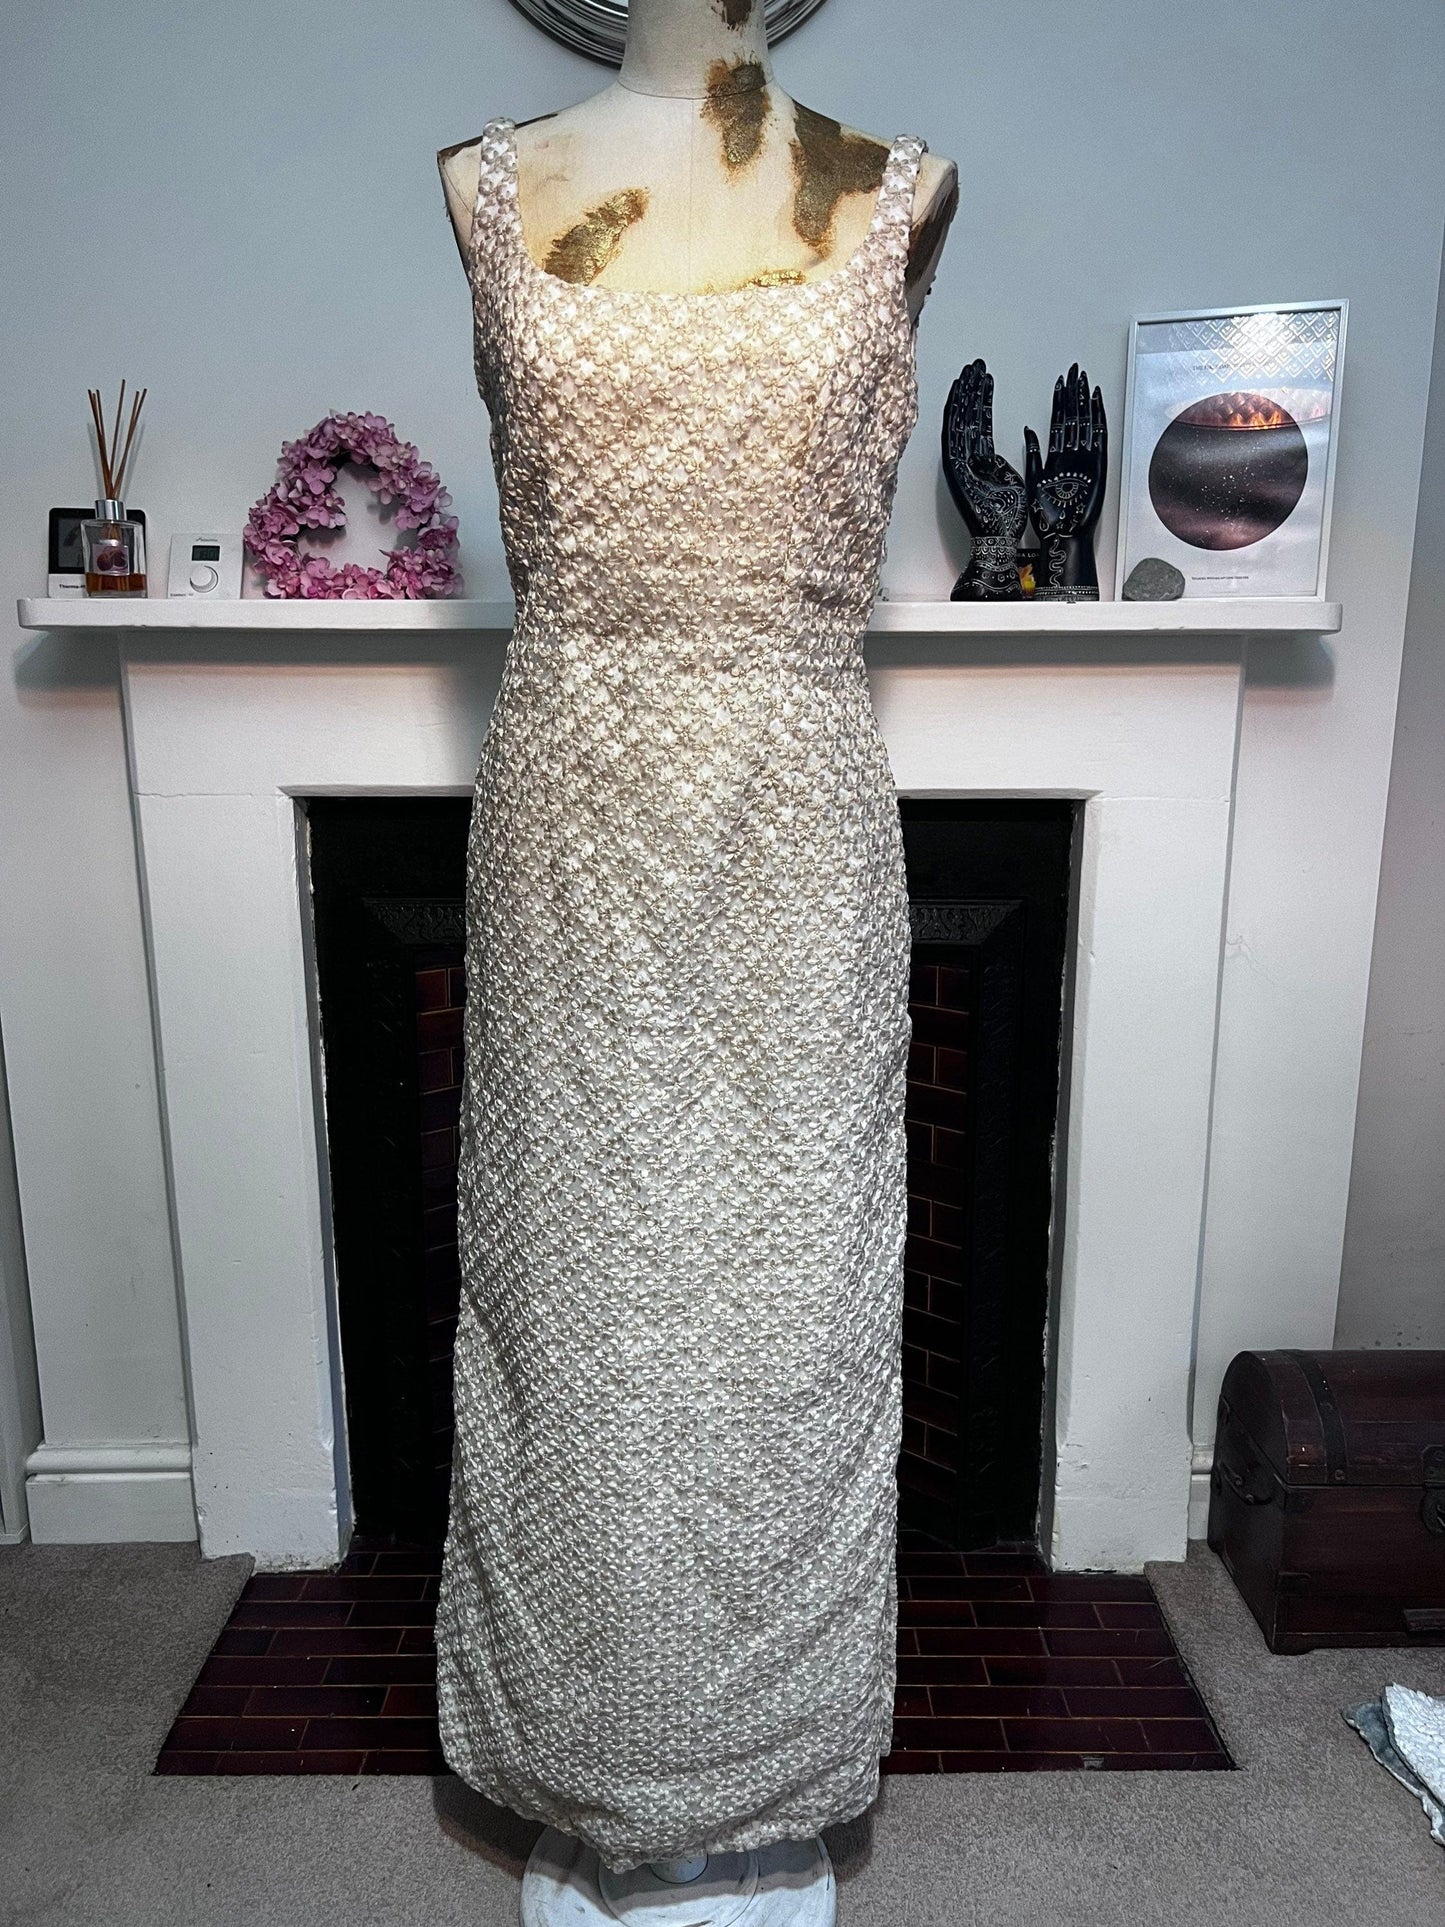 60s Vintage Cream embroidered Maxi Column Dress - Mesh Netting with Individual Embroidered Flower Details over - 10-12